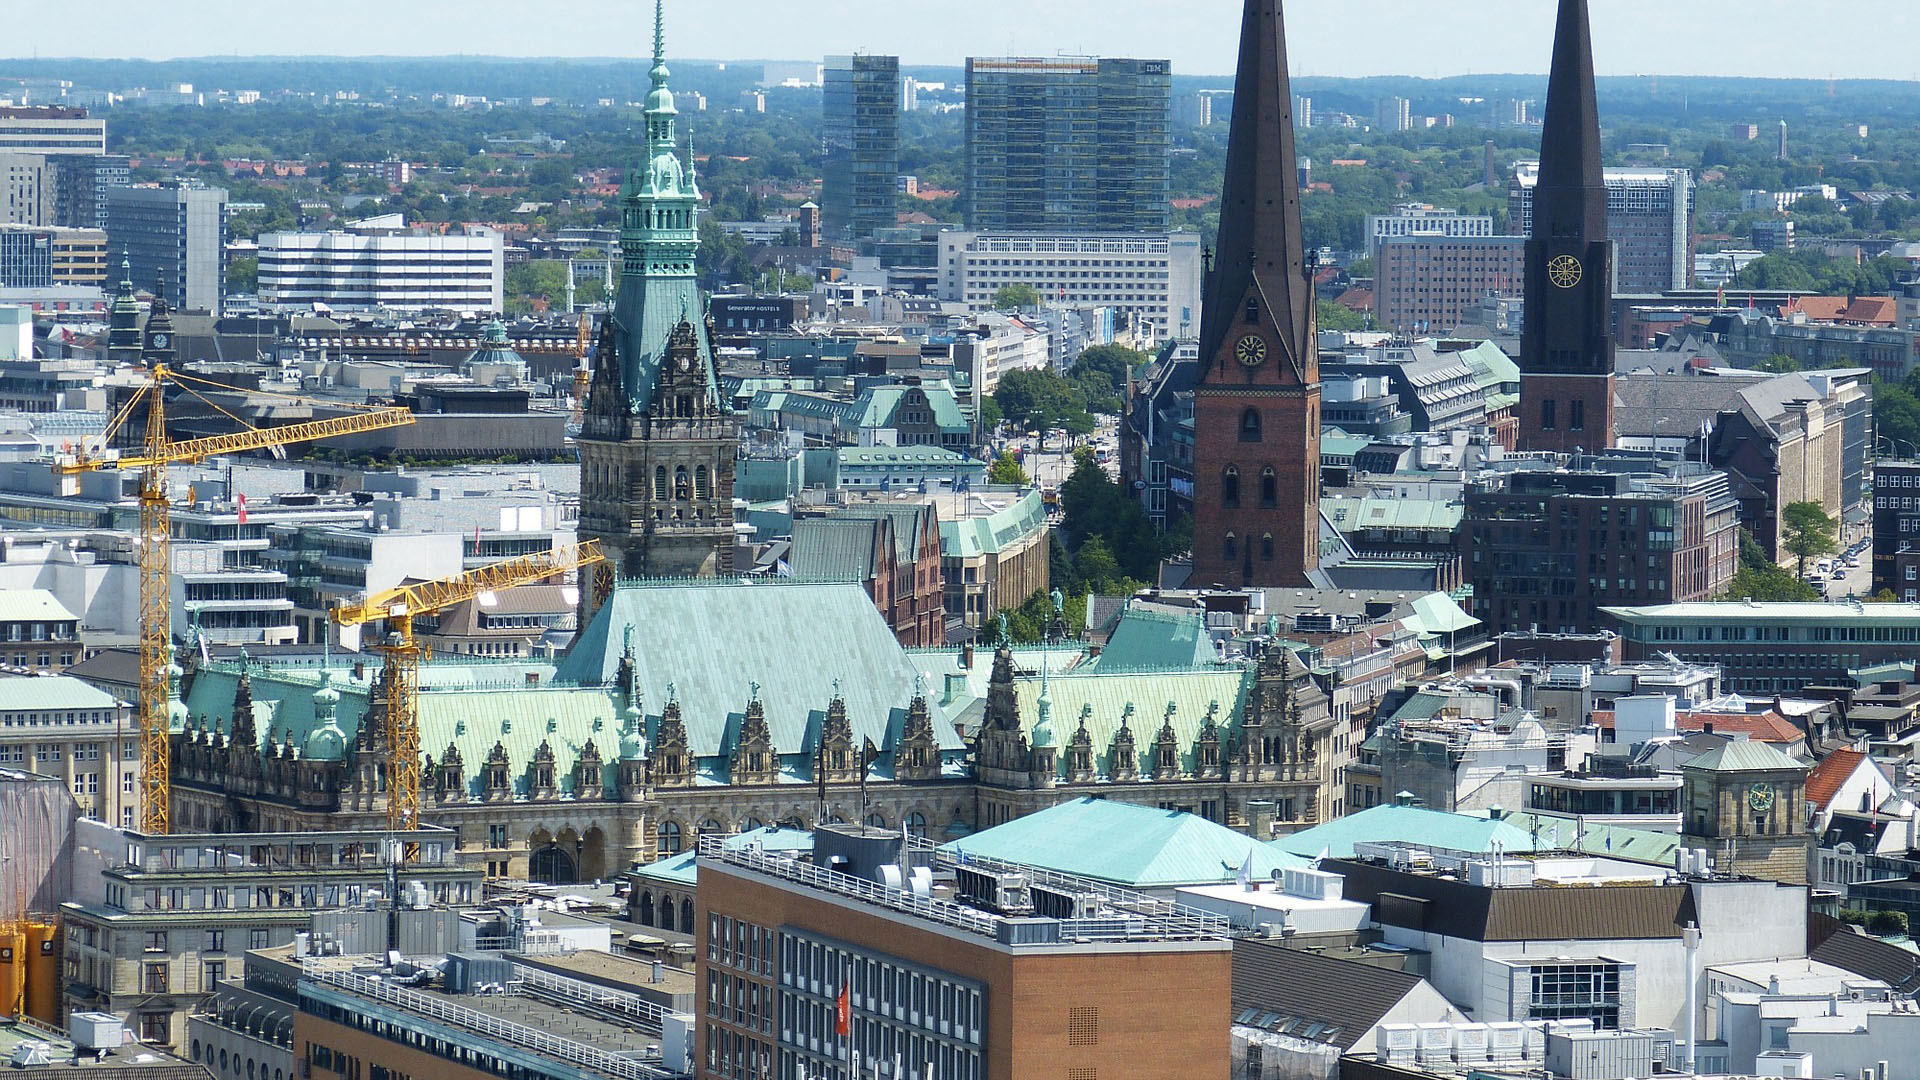 Buildings in the city of Hamburg